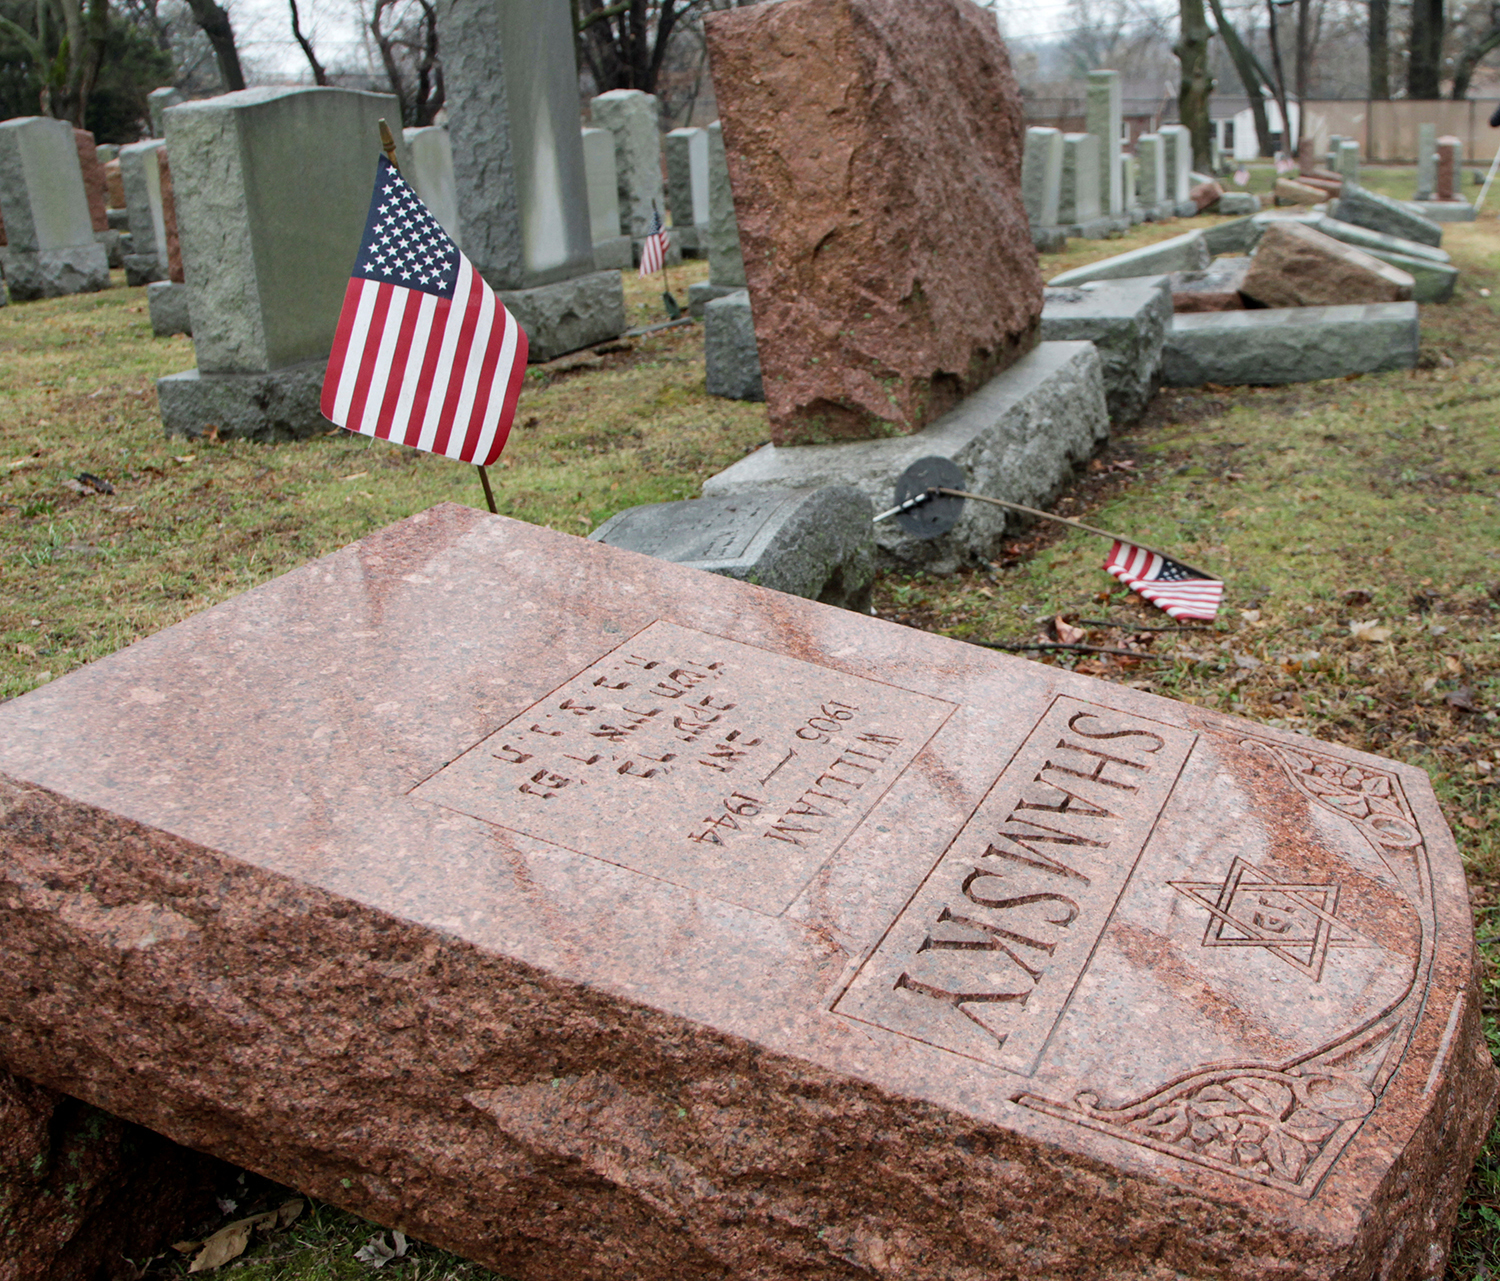 ST LOUIS 2017-02-21 An American flag still stands next to one of over 170 toppled Jewish headstones after a weekend vandalism attack on Chesed Shel Emeth Cemetery in University City, a suburb of St Louis, Missouri, U.S. February 21, 2017. REUTERS/Tom Gannam TPX IMAGES OF THE DAY Photo: / REUTERS / TT / kod 72000